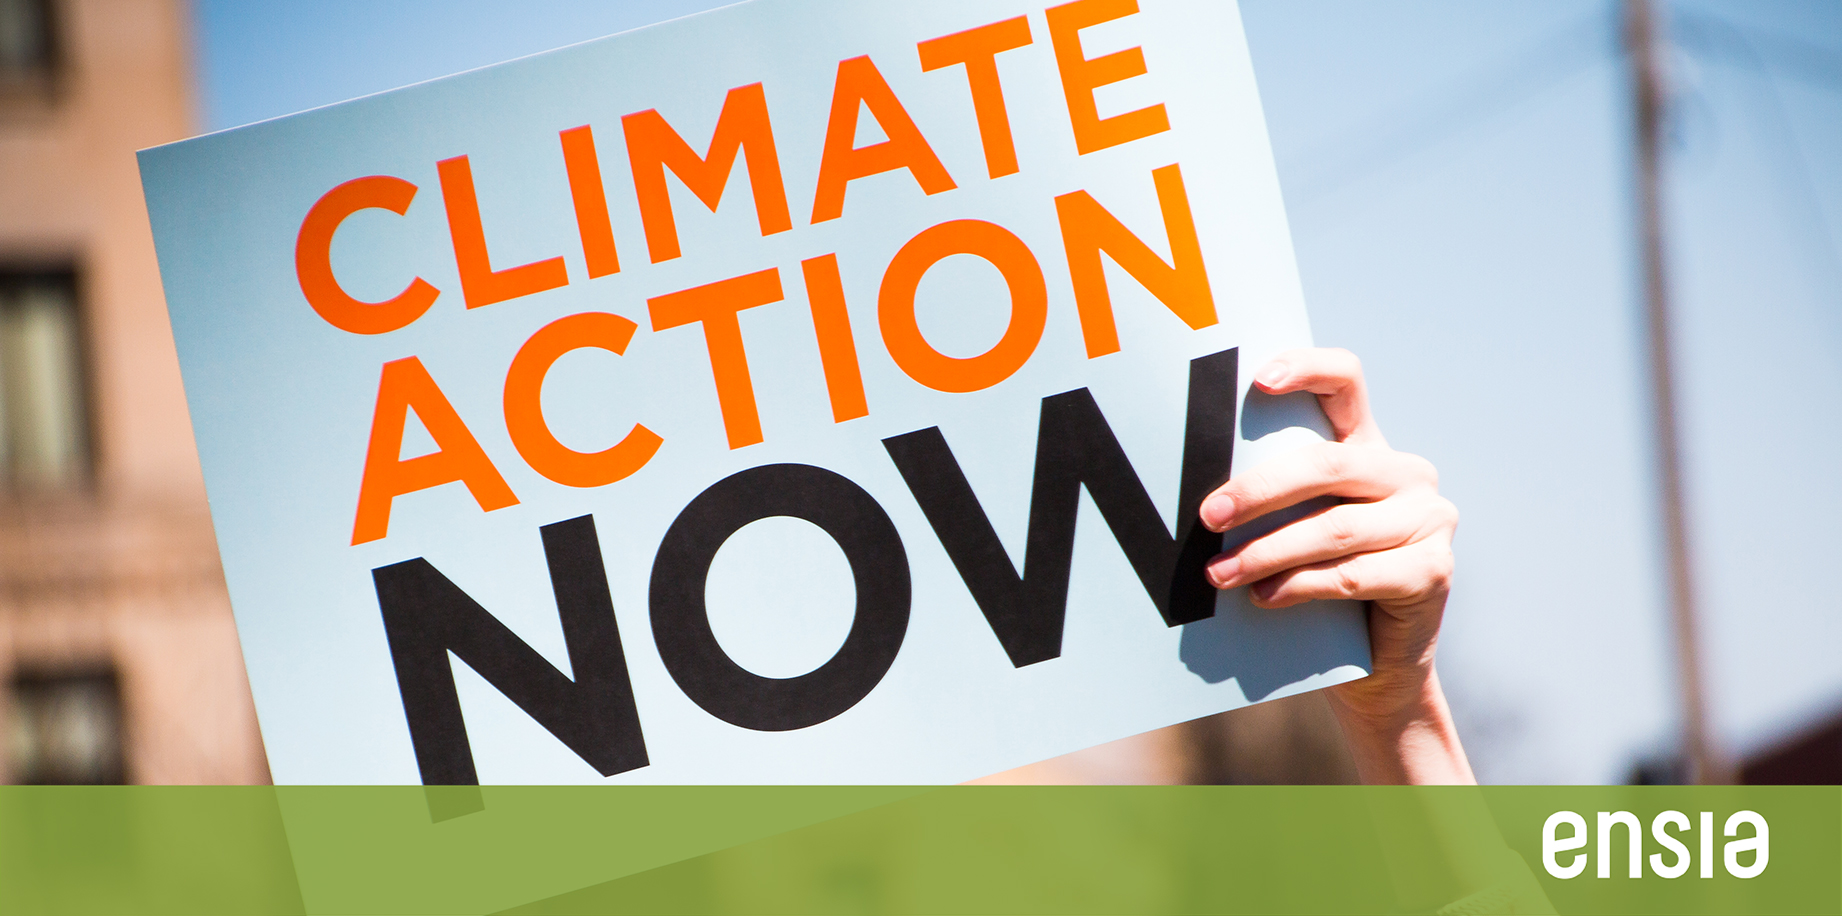 6 ways to change climate concern into action - Ensia